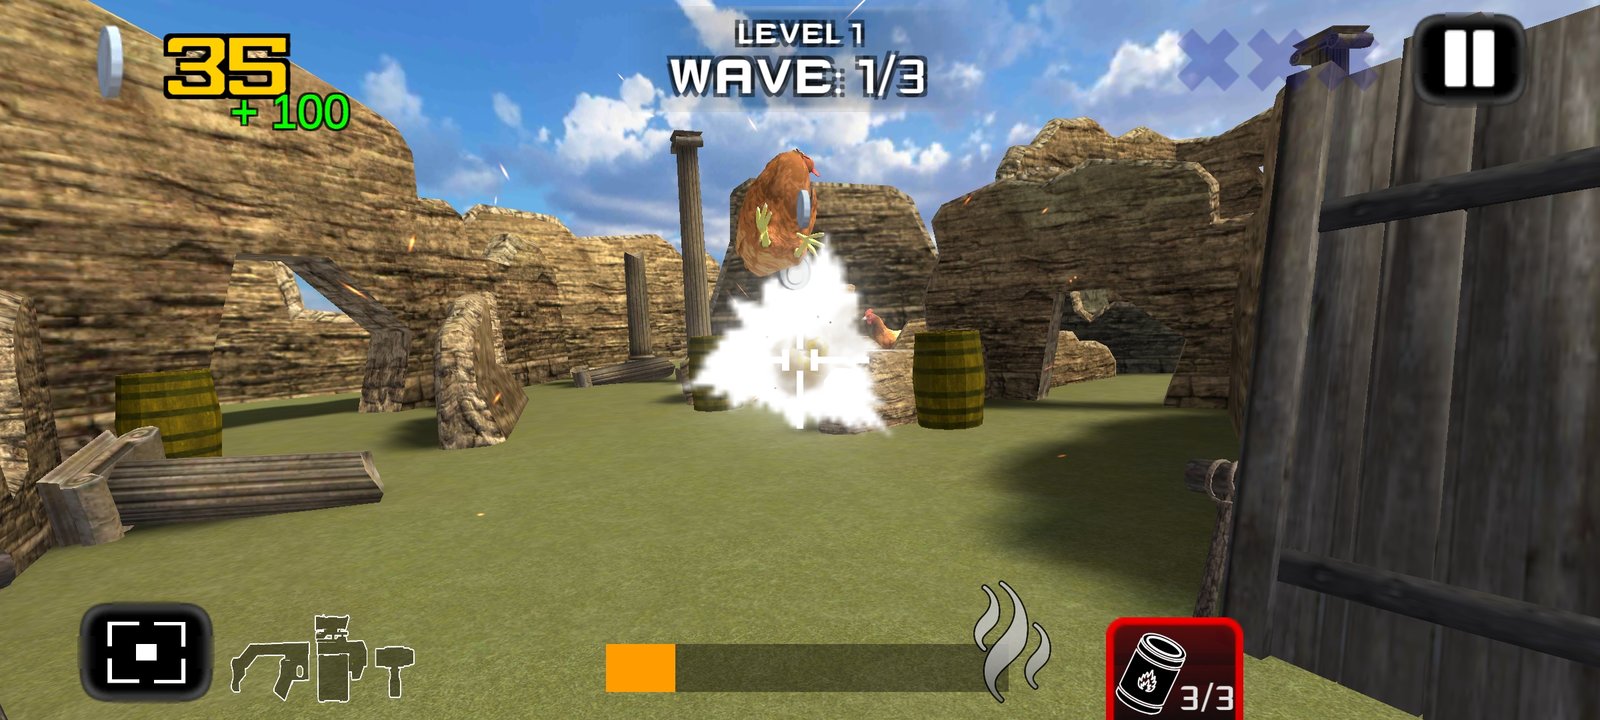 Chicken Gun Game - Shooter 3D v3.2.292 MOD APK -  - Android &  iOS MODs, Mobile Games & Apps